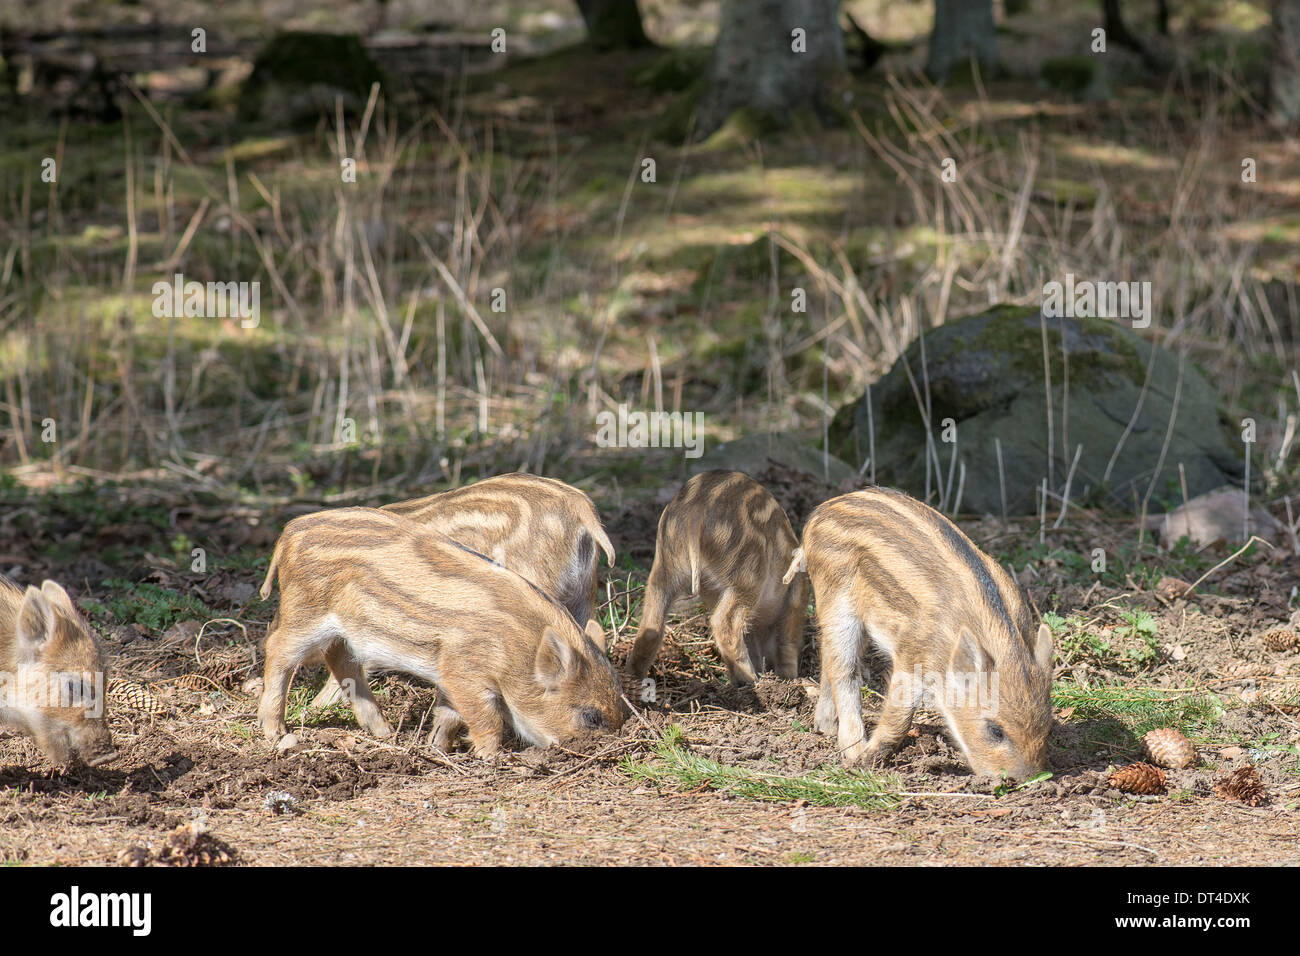 Piglets of the wild boar or wild pig, Sus scrofa searching for food in the forest Stock Photo